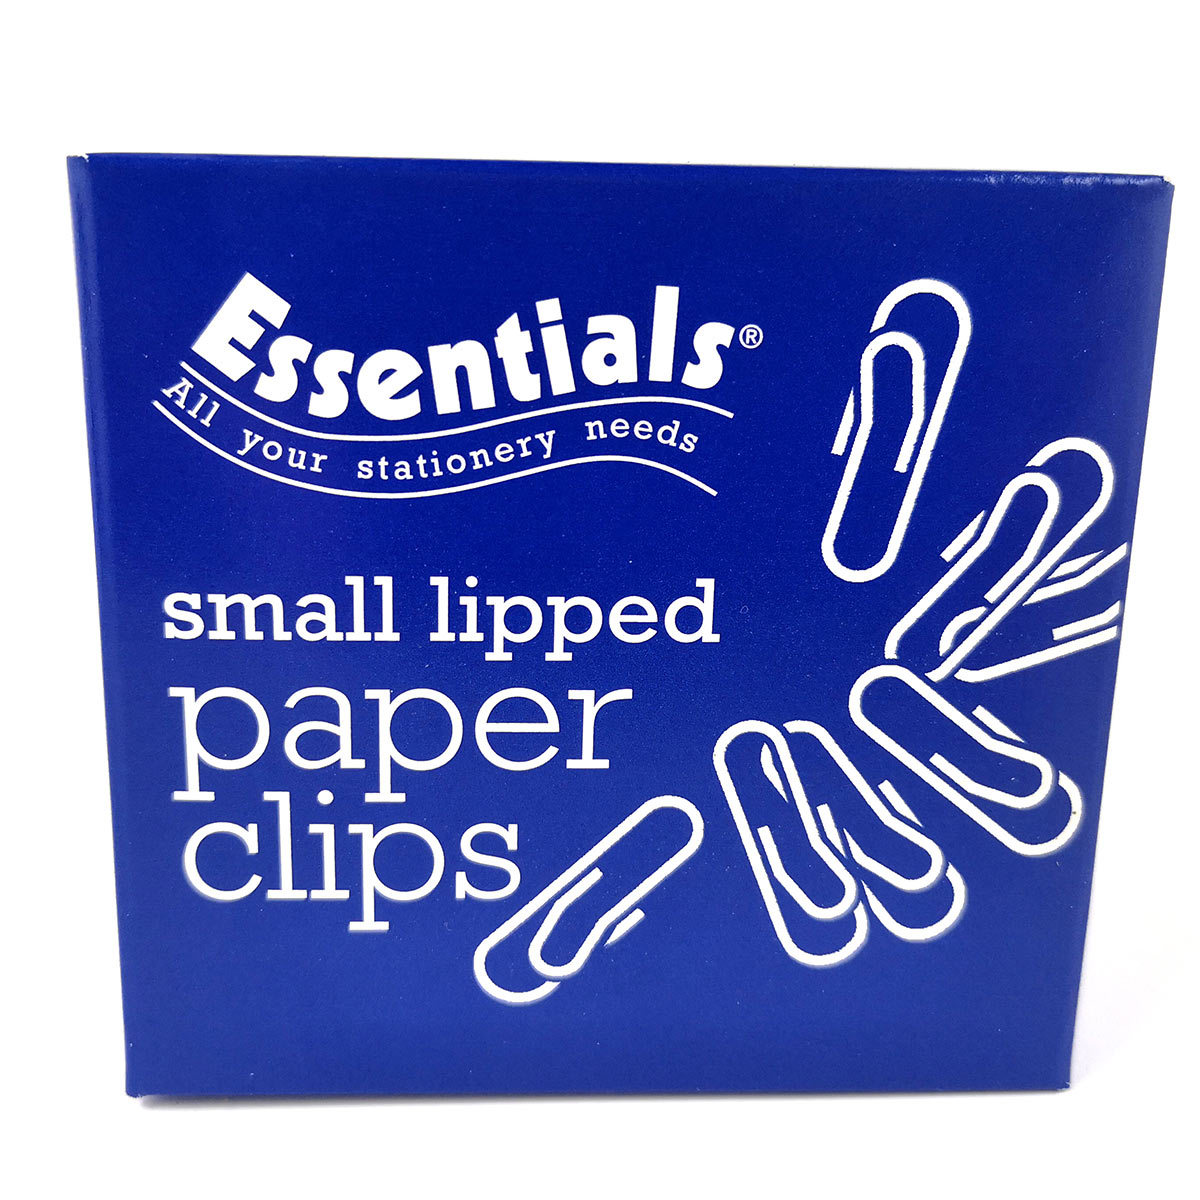 Essentials (22mm) Small Lipped Paperclips - Box of 1000